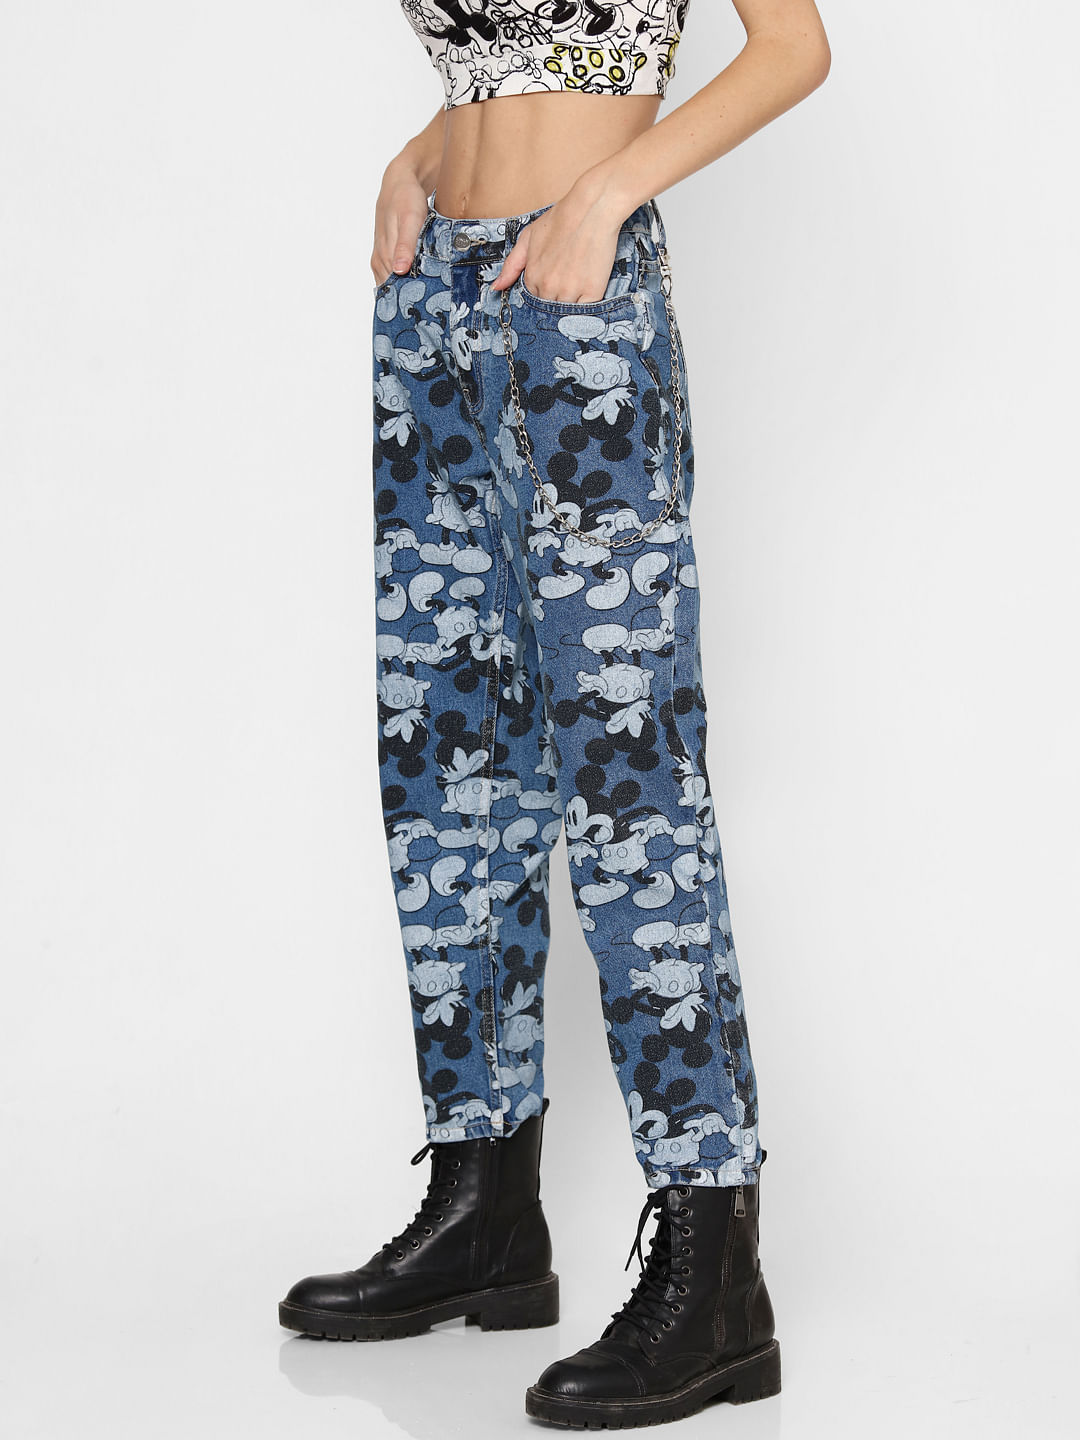 Printed Jeans for Men and Women  10 Must Try Collection